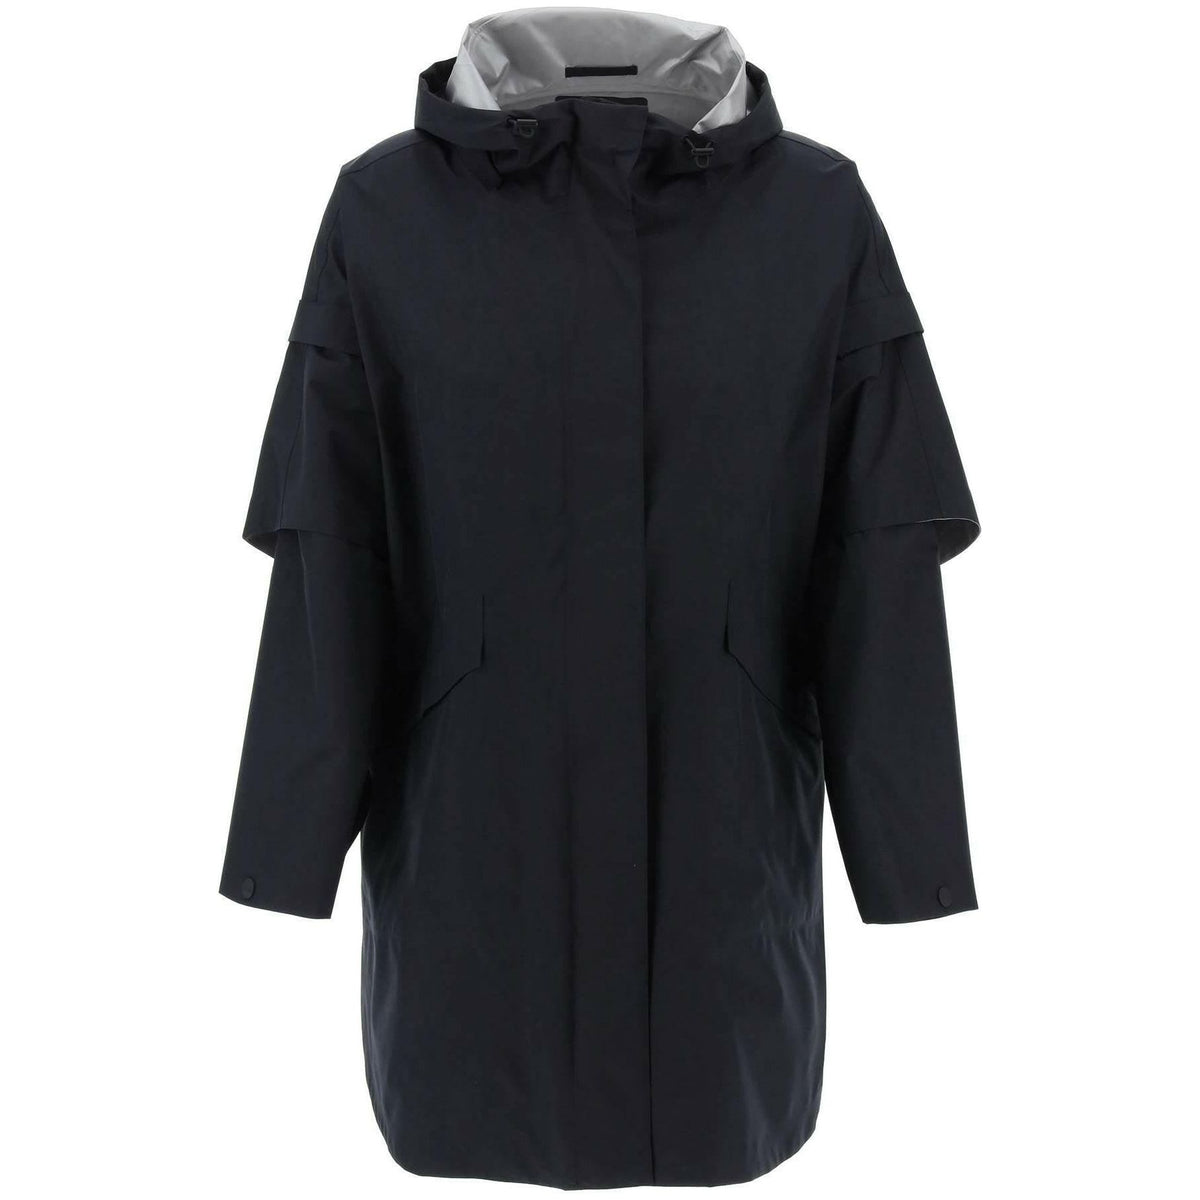 HERNO LAMINAR - Black GORE-TEx Cape With Removable Sleeves - JOHN JULIA